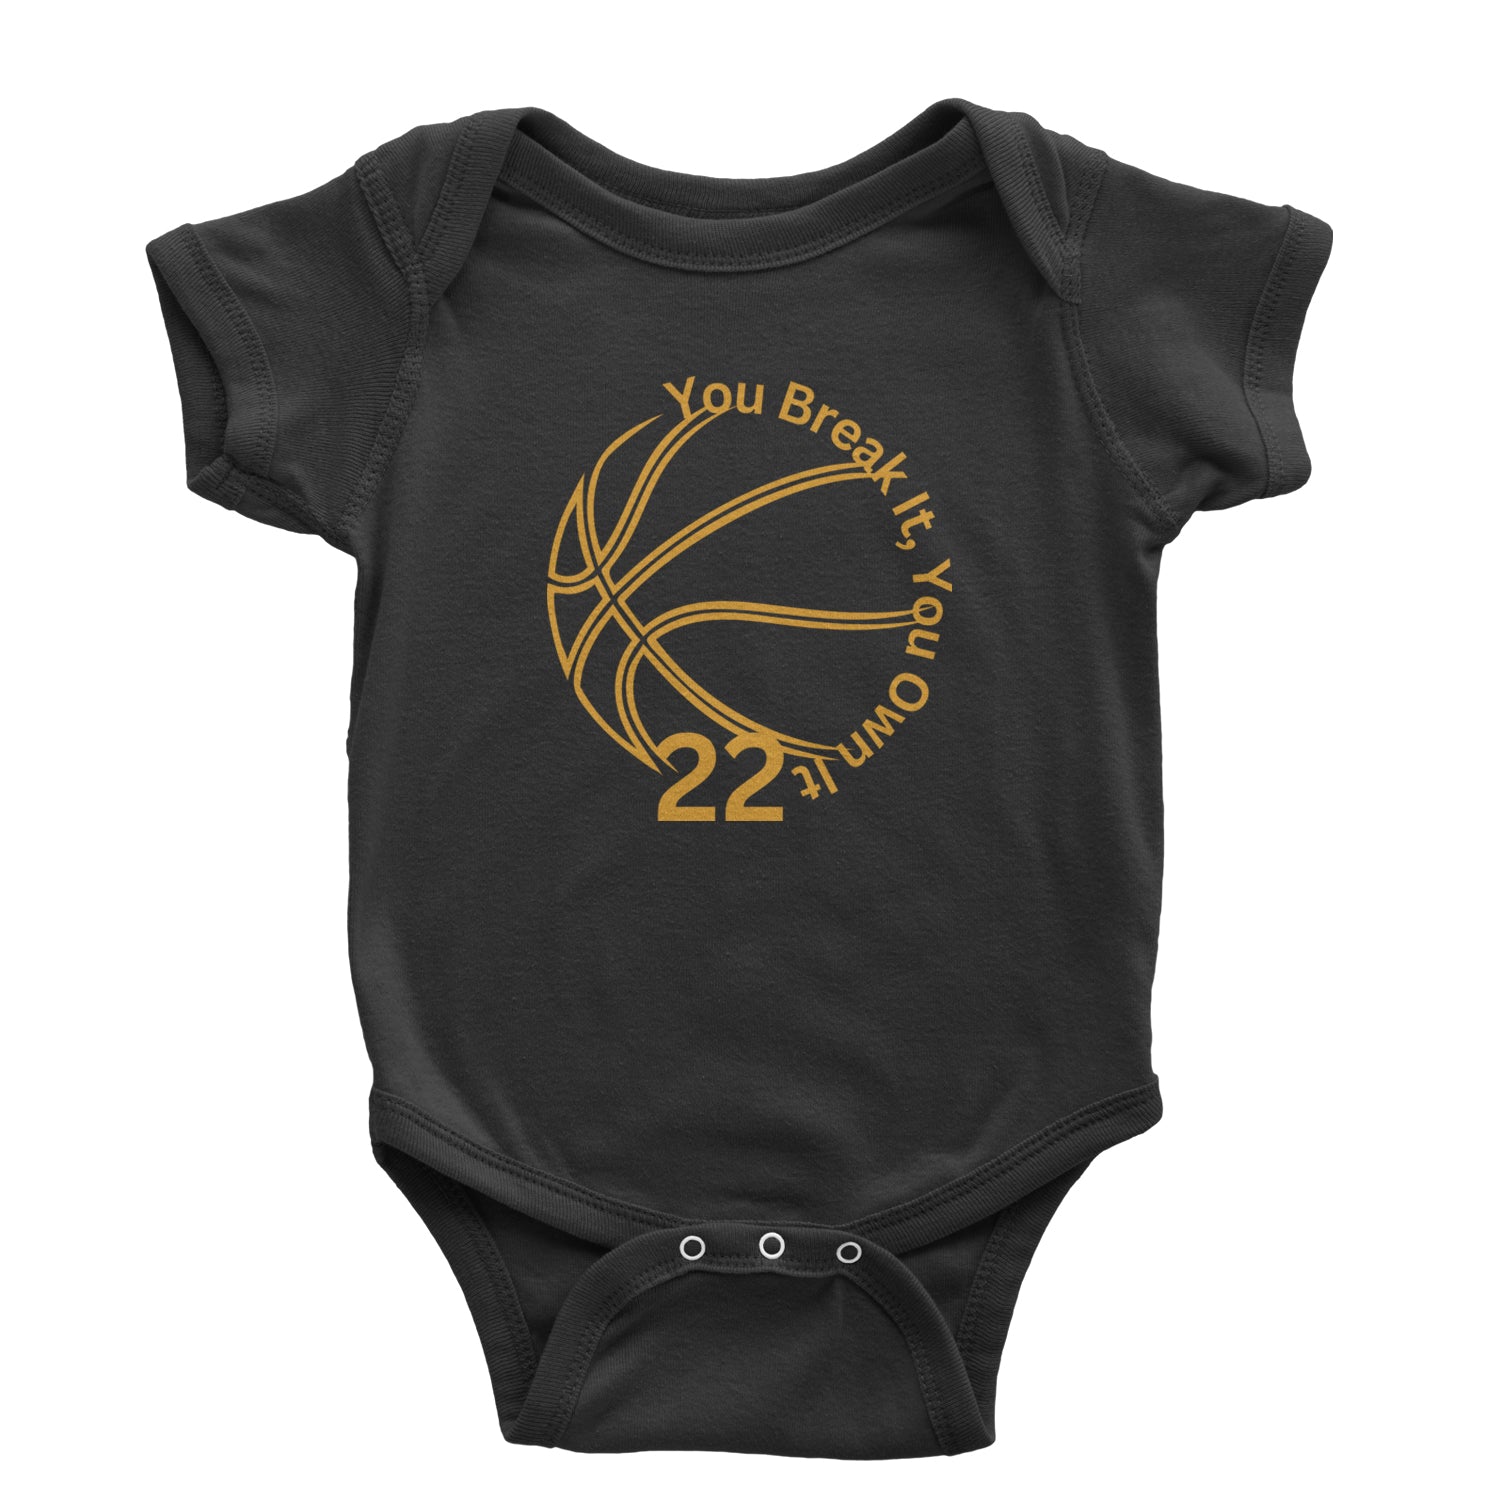 You Break It You Own It 22 Basketball Infant One-Piece Romper Bodysuit and Toddler T-shirt